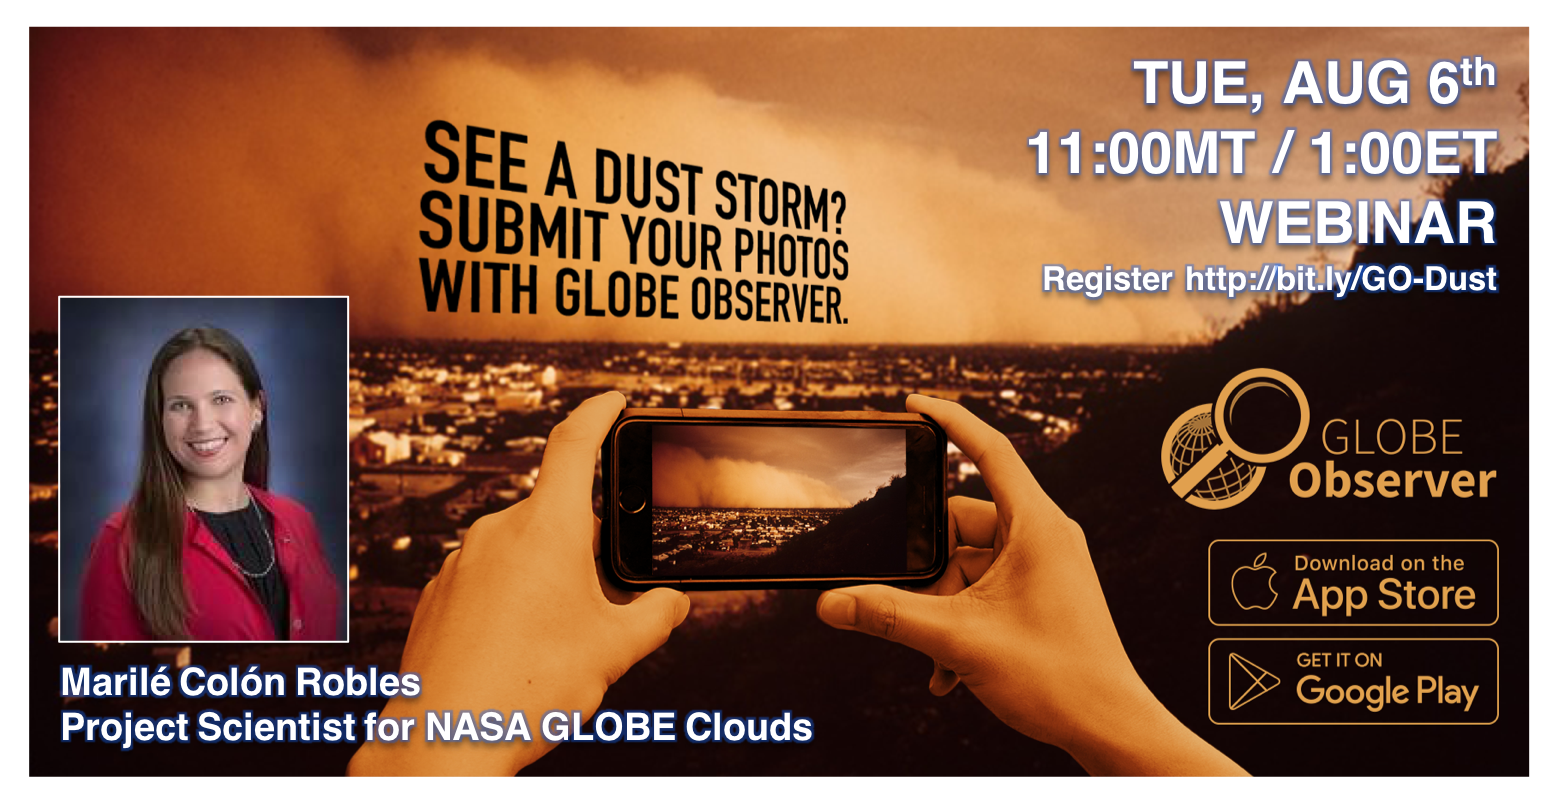 Do you see a dust storm? Submit your photos with GLOBE Observer.